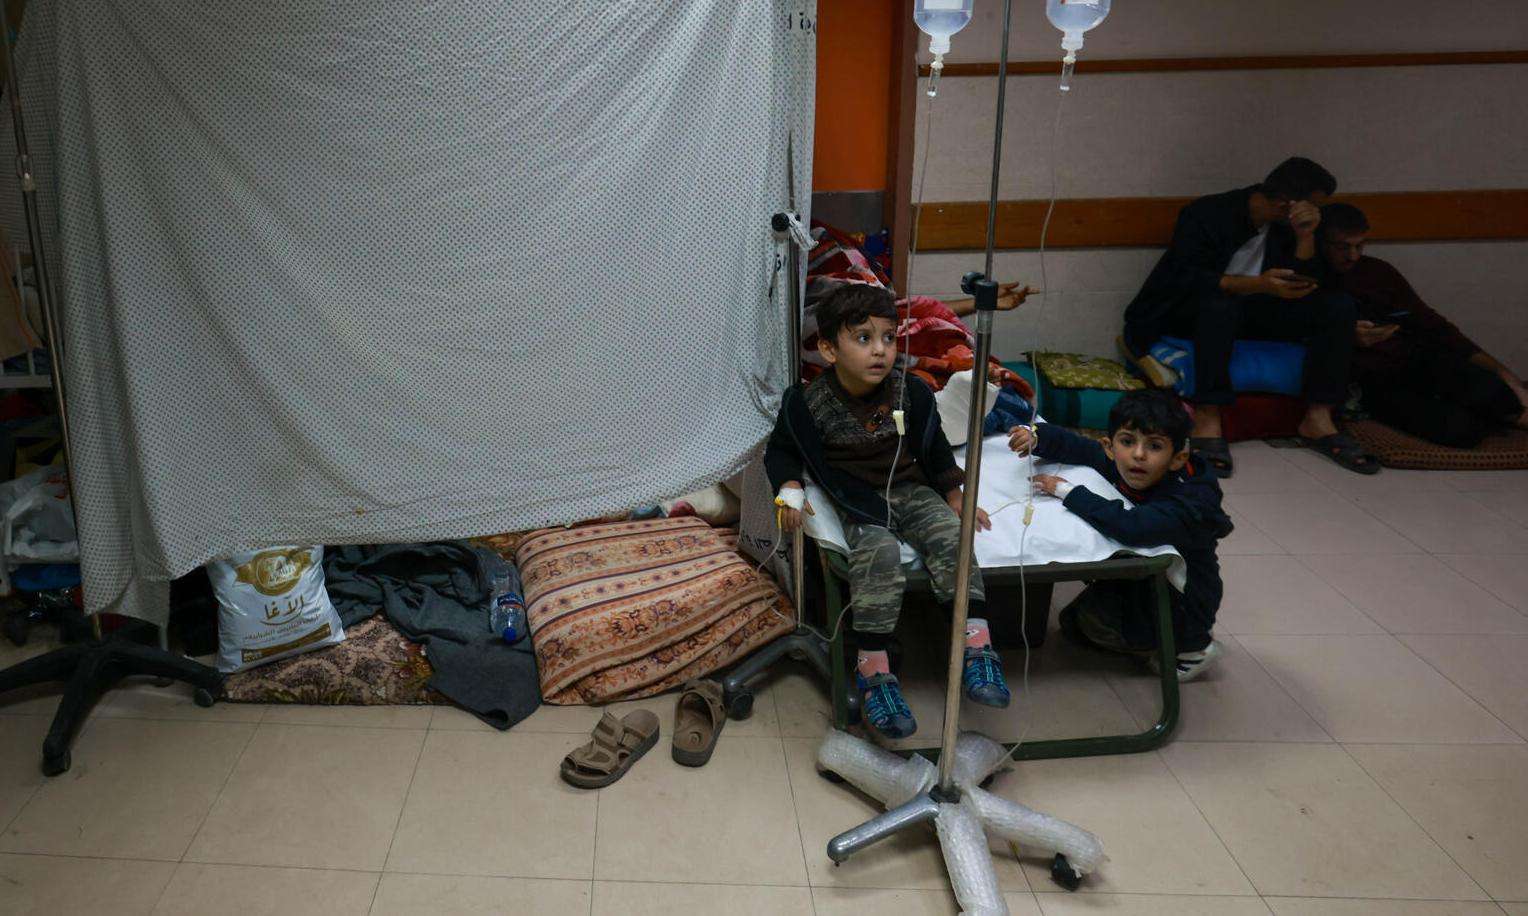 Patients on the floor at Al Aqsa hospital in Gaza with a sheet.